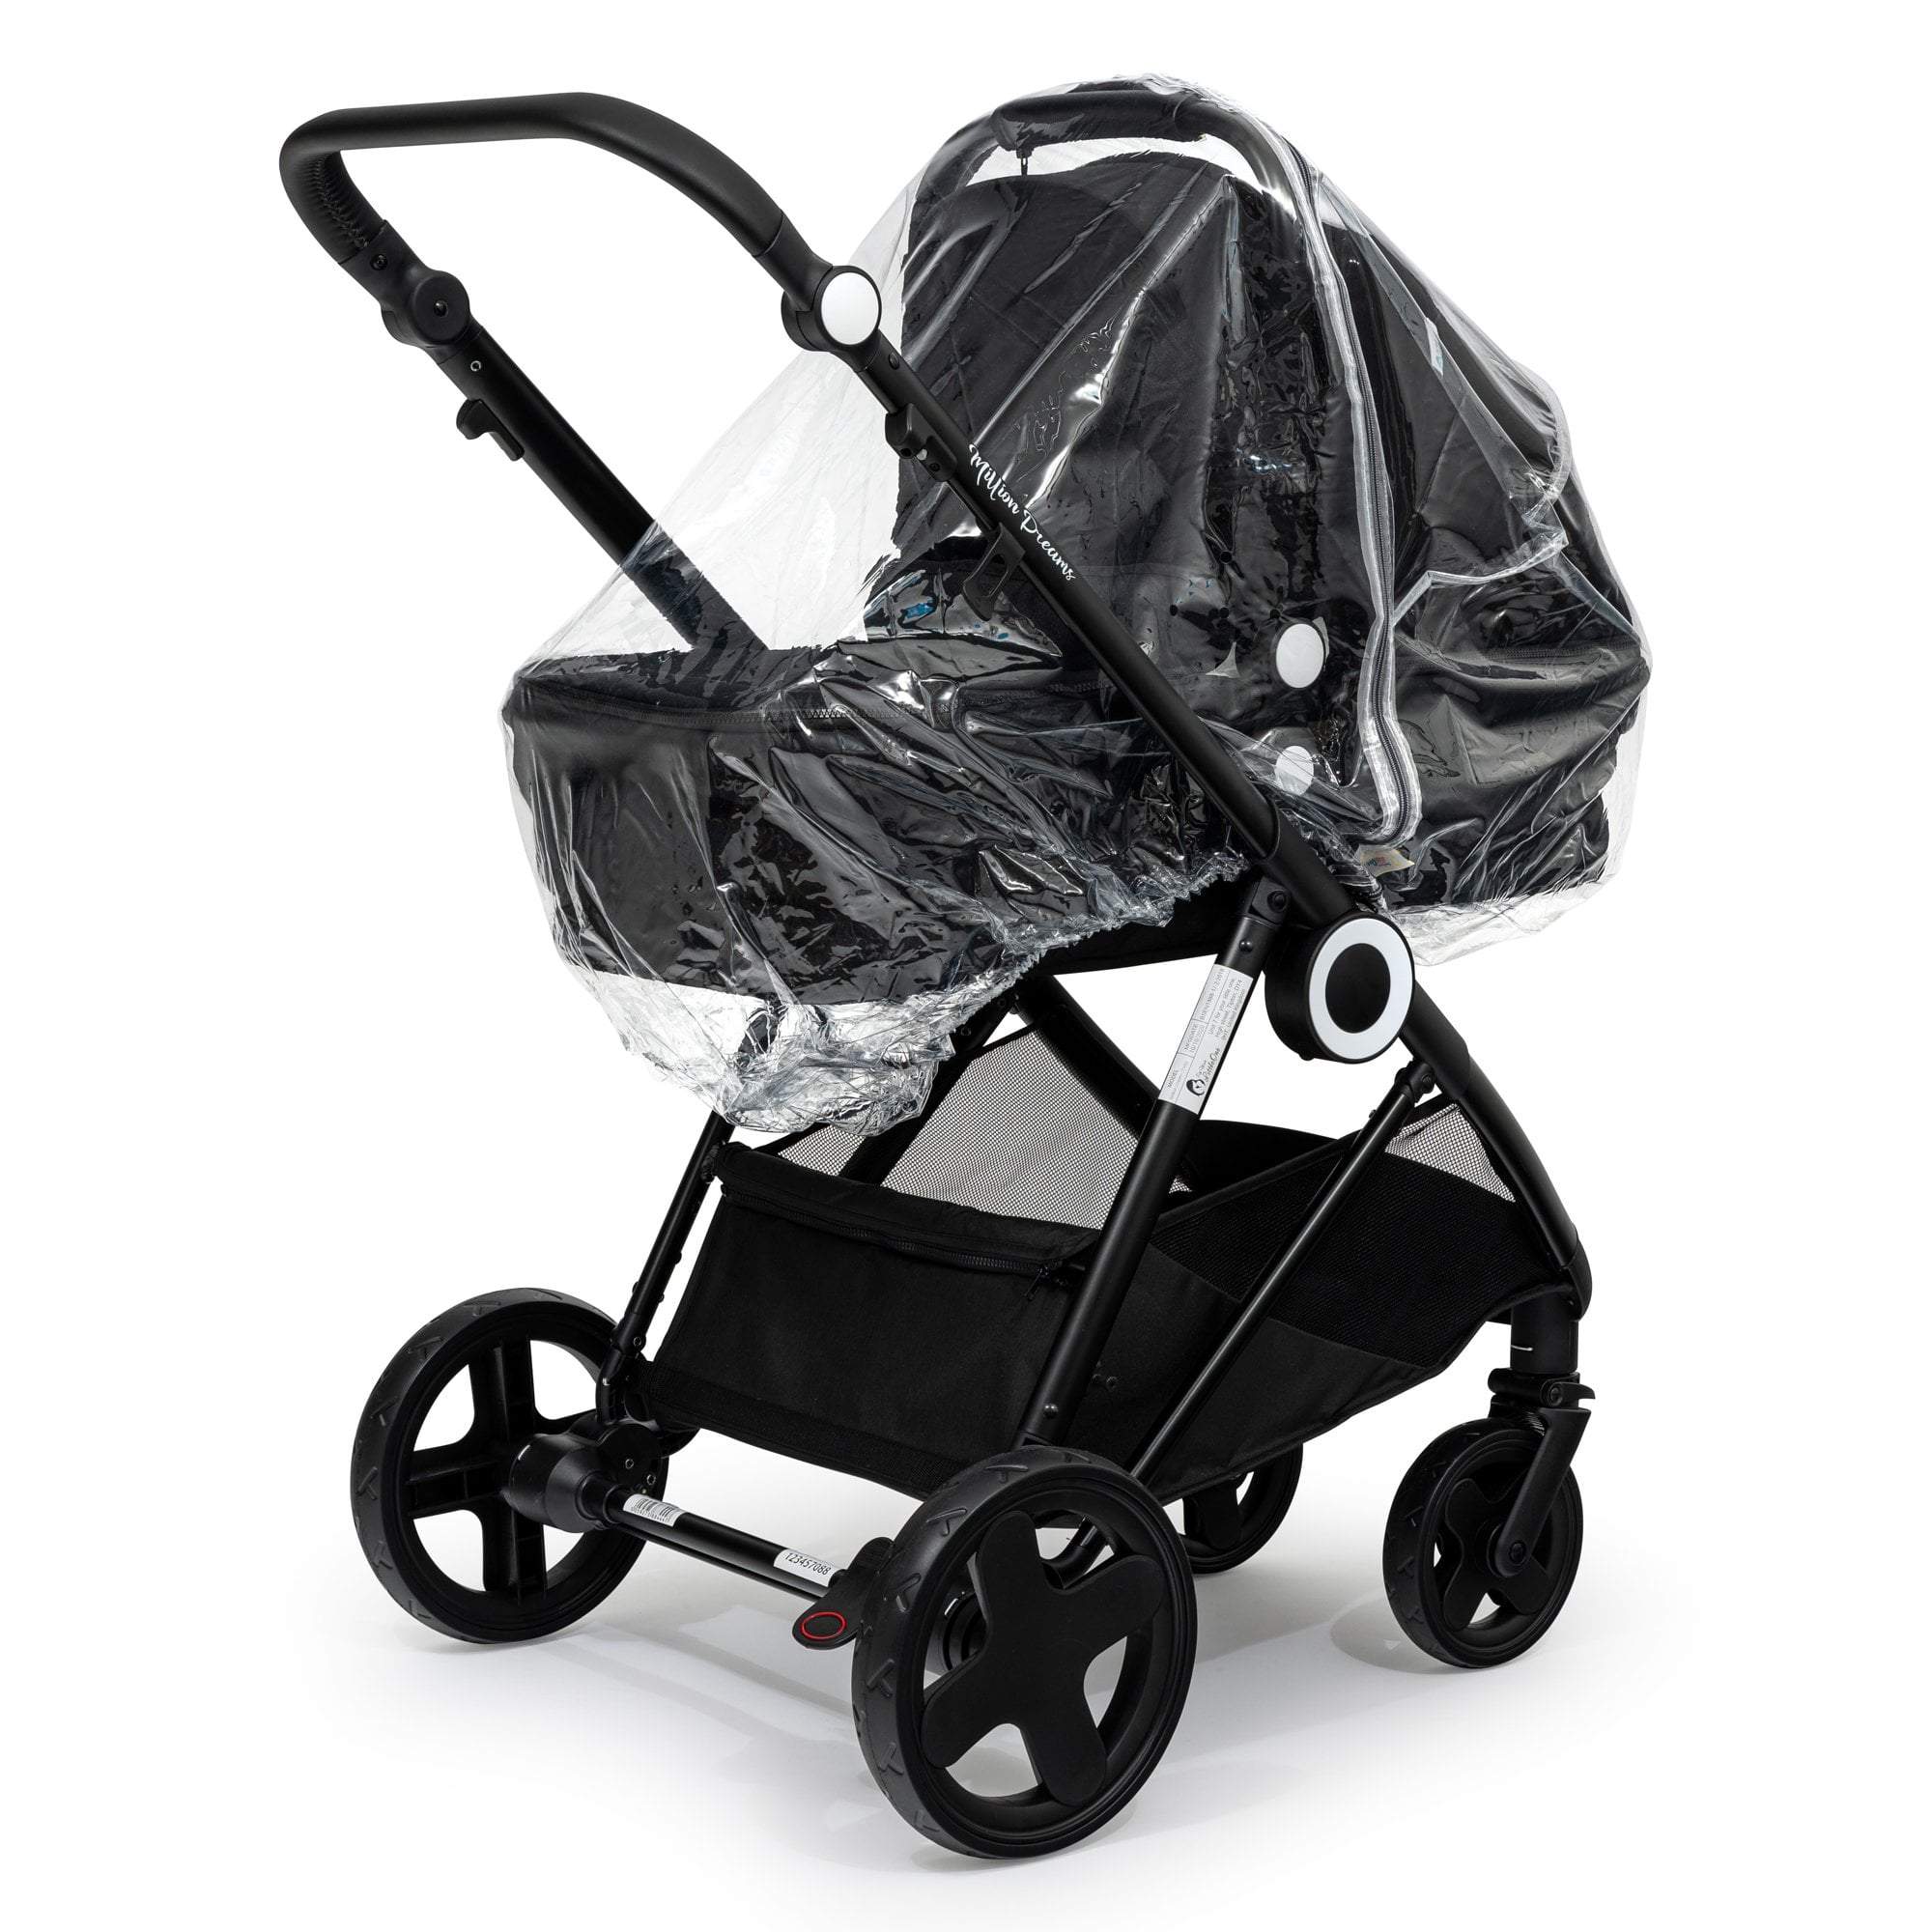 Carrycot Raincover Compatible With BabyDan - Fits All Models -  | For Your Little One